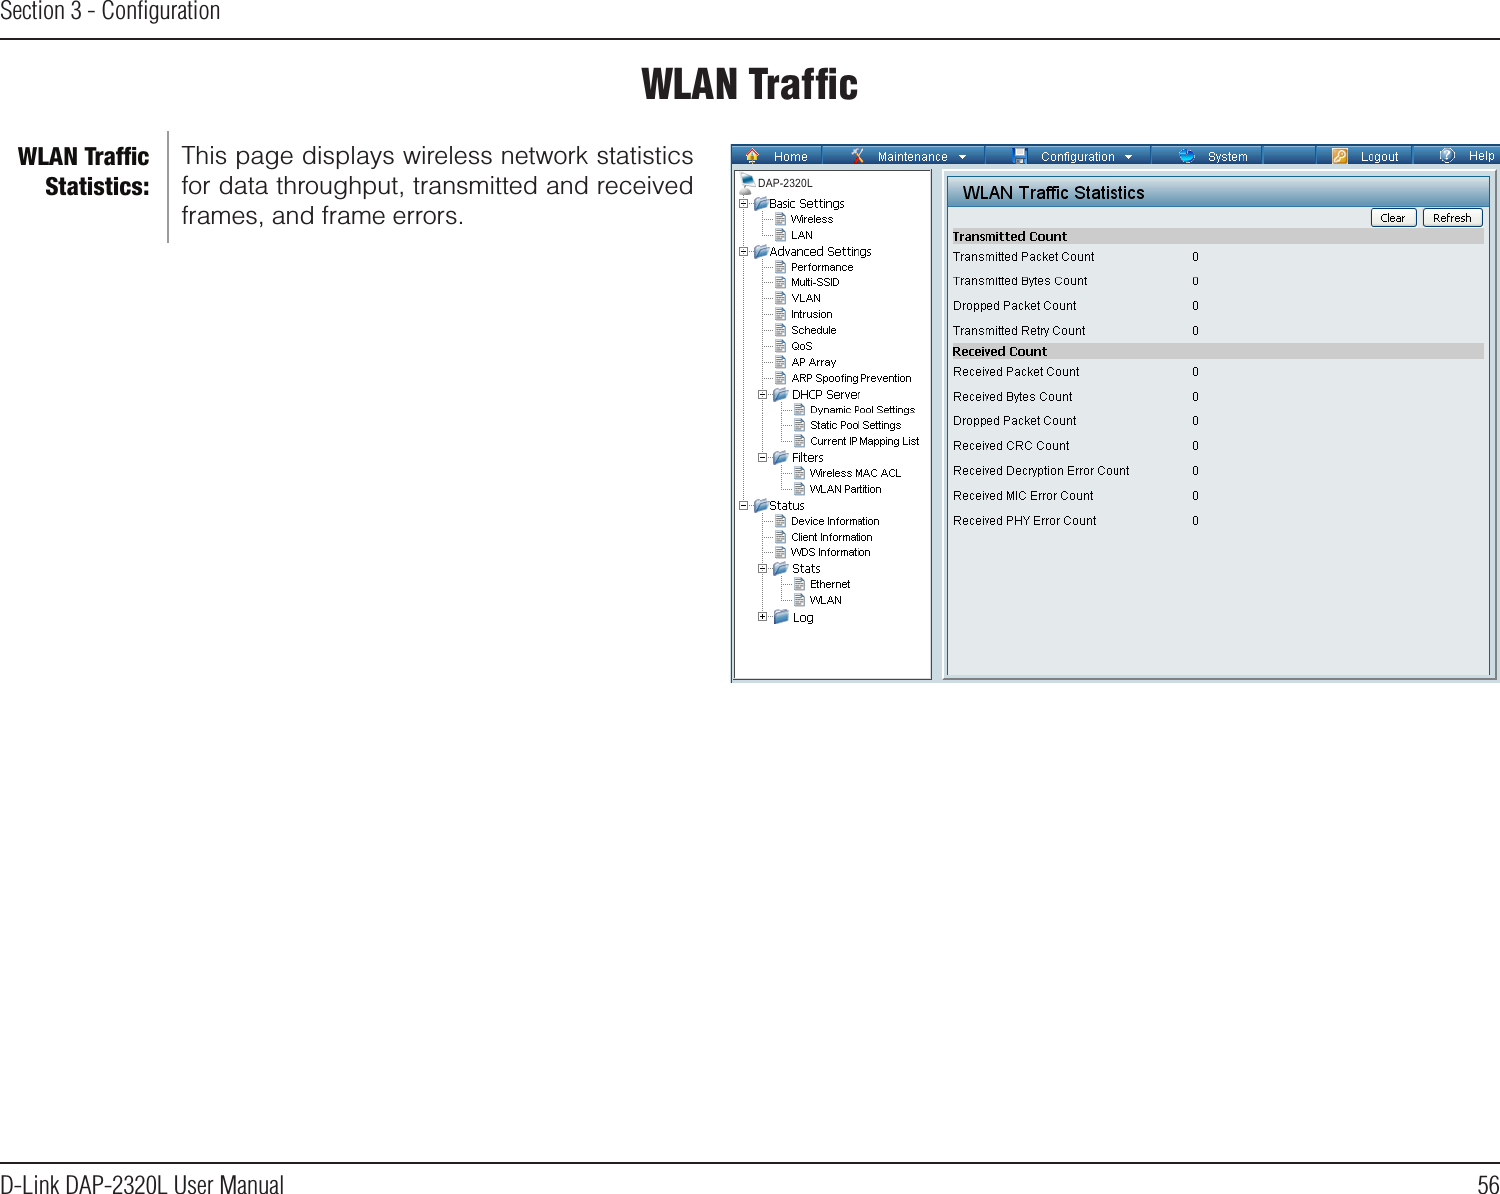 56D-Link DAP-2320L User ManualSection 3 - ConﬁgurationWLAN TrafﬁcThis page displays wireless network statistics for data throughput, transmitted and received frames, and frame errors.WLAN Trafﬁc Statistics:DAP-2320L